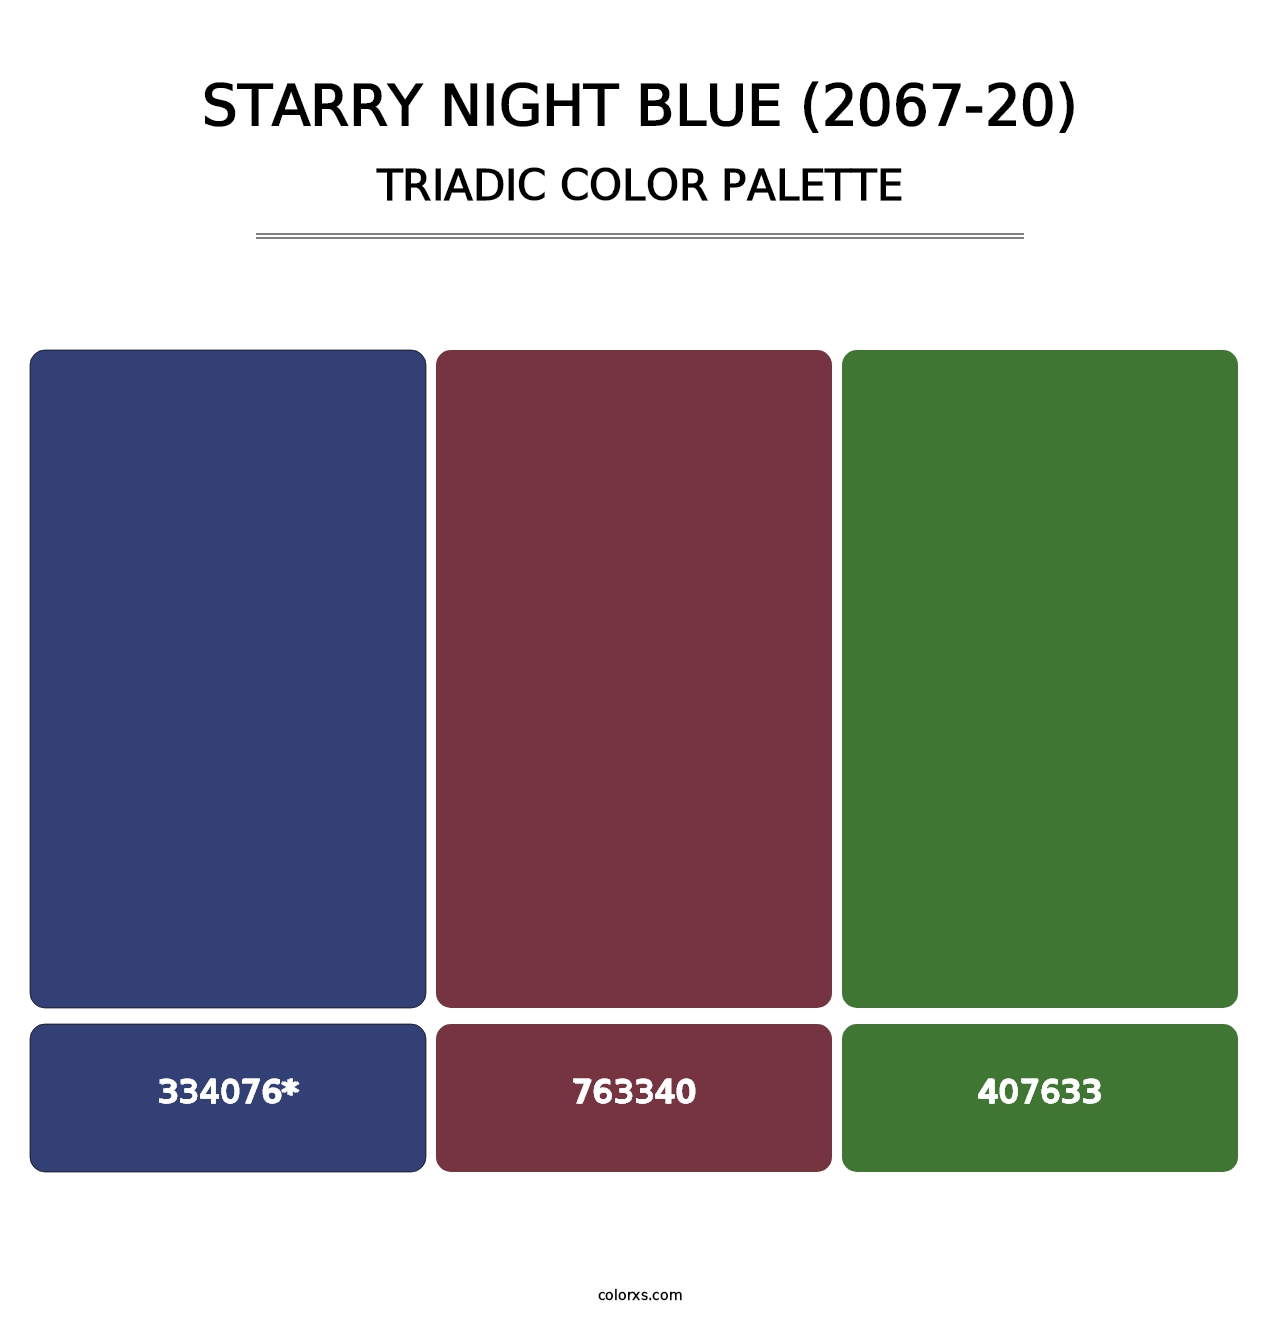 Starry Night Blue (2067-20) - Triadic Color Palette